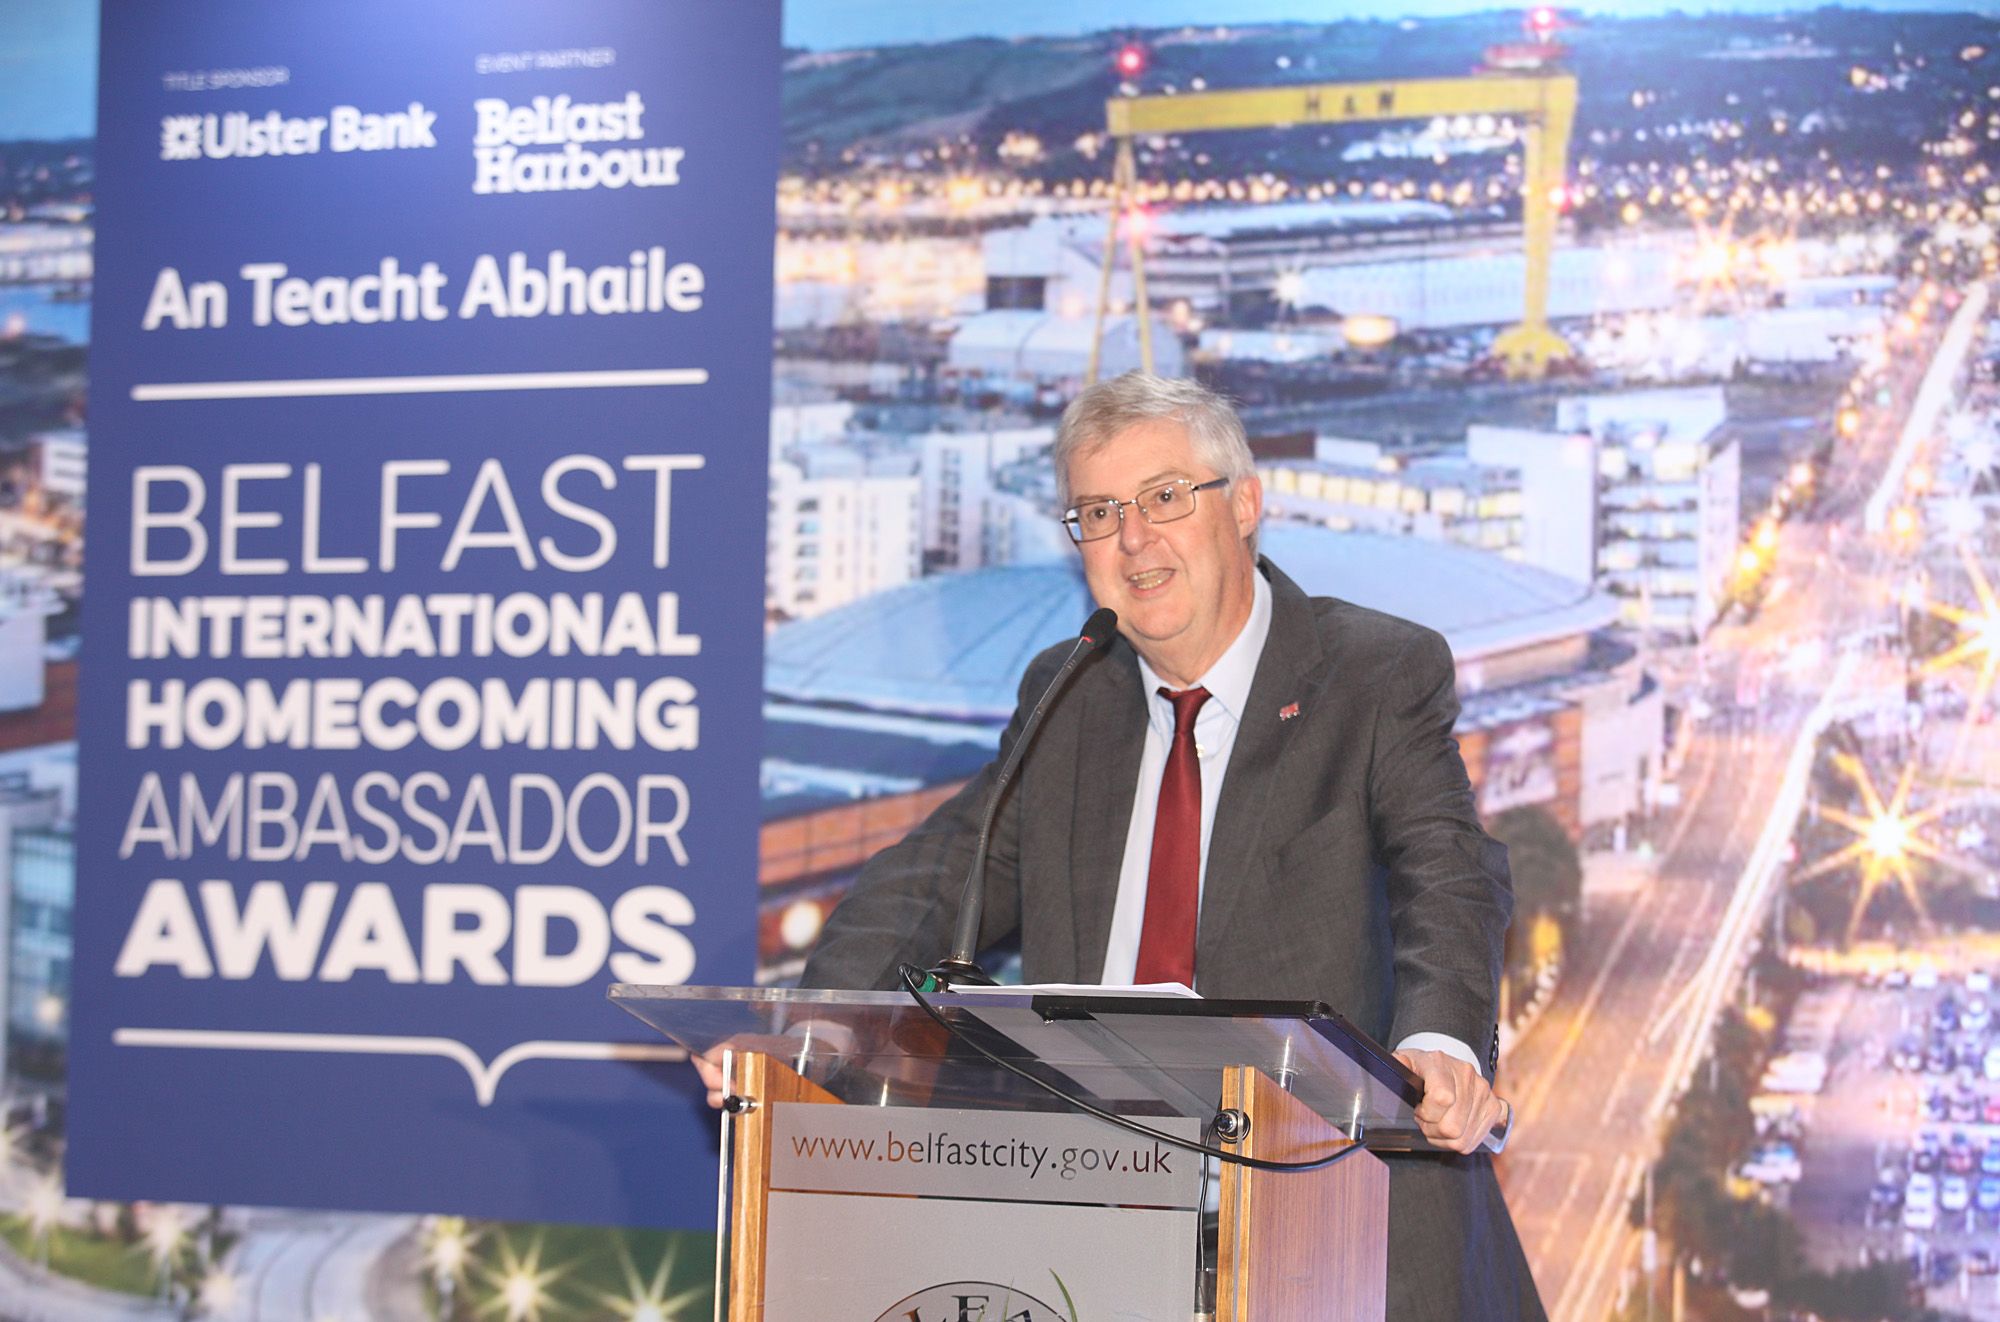 FEDERAL SOLUTION: Welsh First Minister Mark Drakeford laying out his proposals for a federal UK at the Belfast International Homecoming in Belfast City Hall in October 2019.